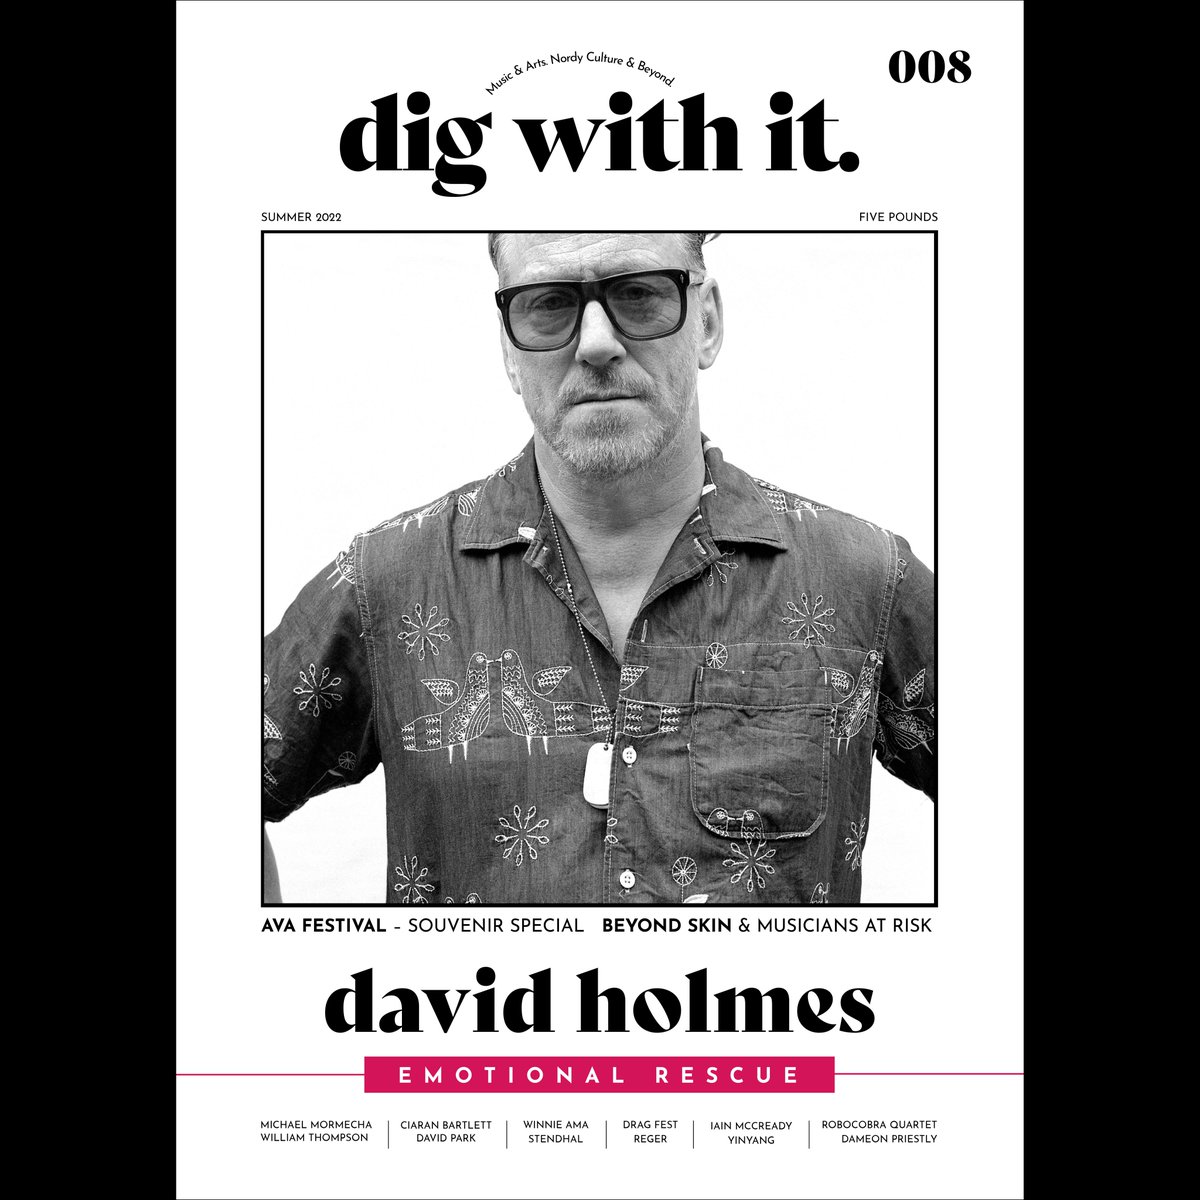 In the latest @dig_with_it I interviewed James Bruce @BellularStudios & @_optmst reviewed @Hanpeel and NI Electronic Workshop release @Julie_Analogue @TONNRECORDINGS Plus great pieces on @DavidHolmes____ Iain McCready by @MrTimmyStewart and @AVAFestivalNI + more.